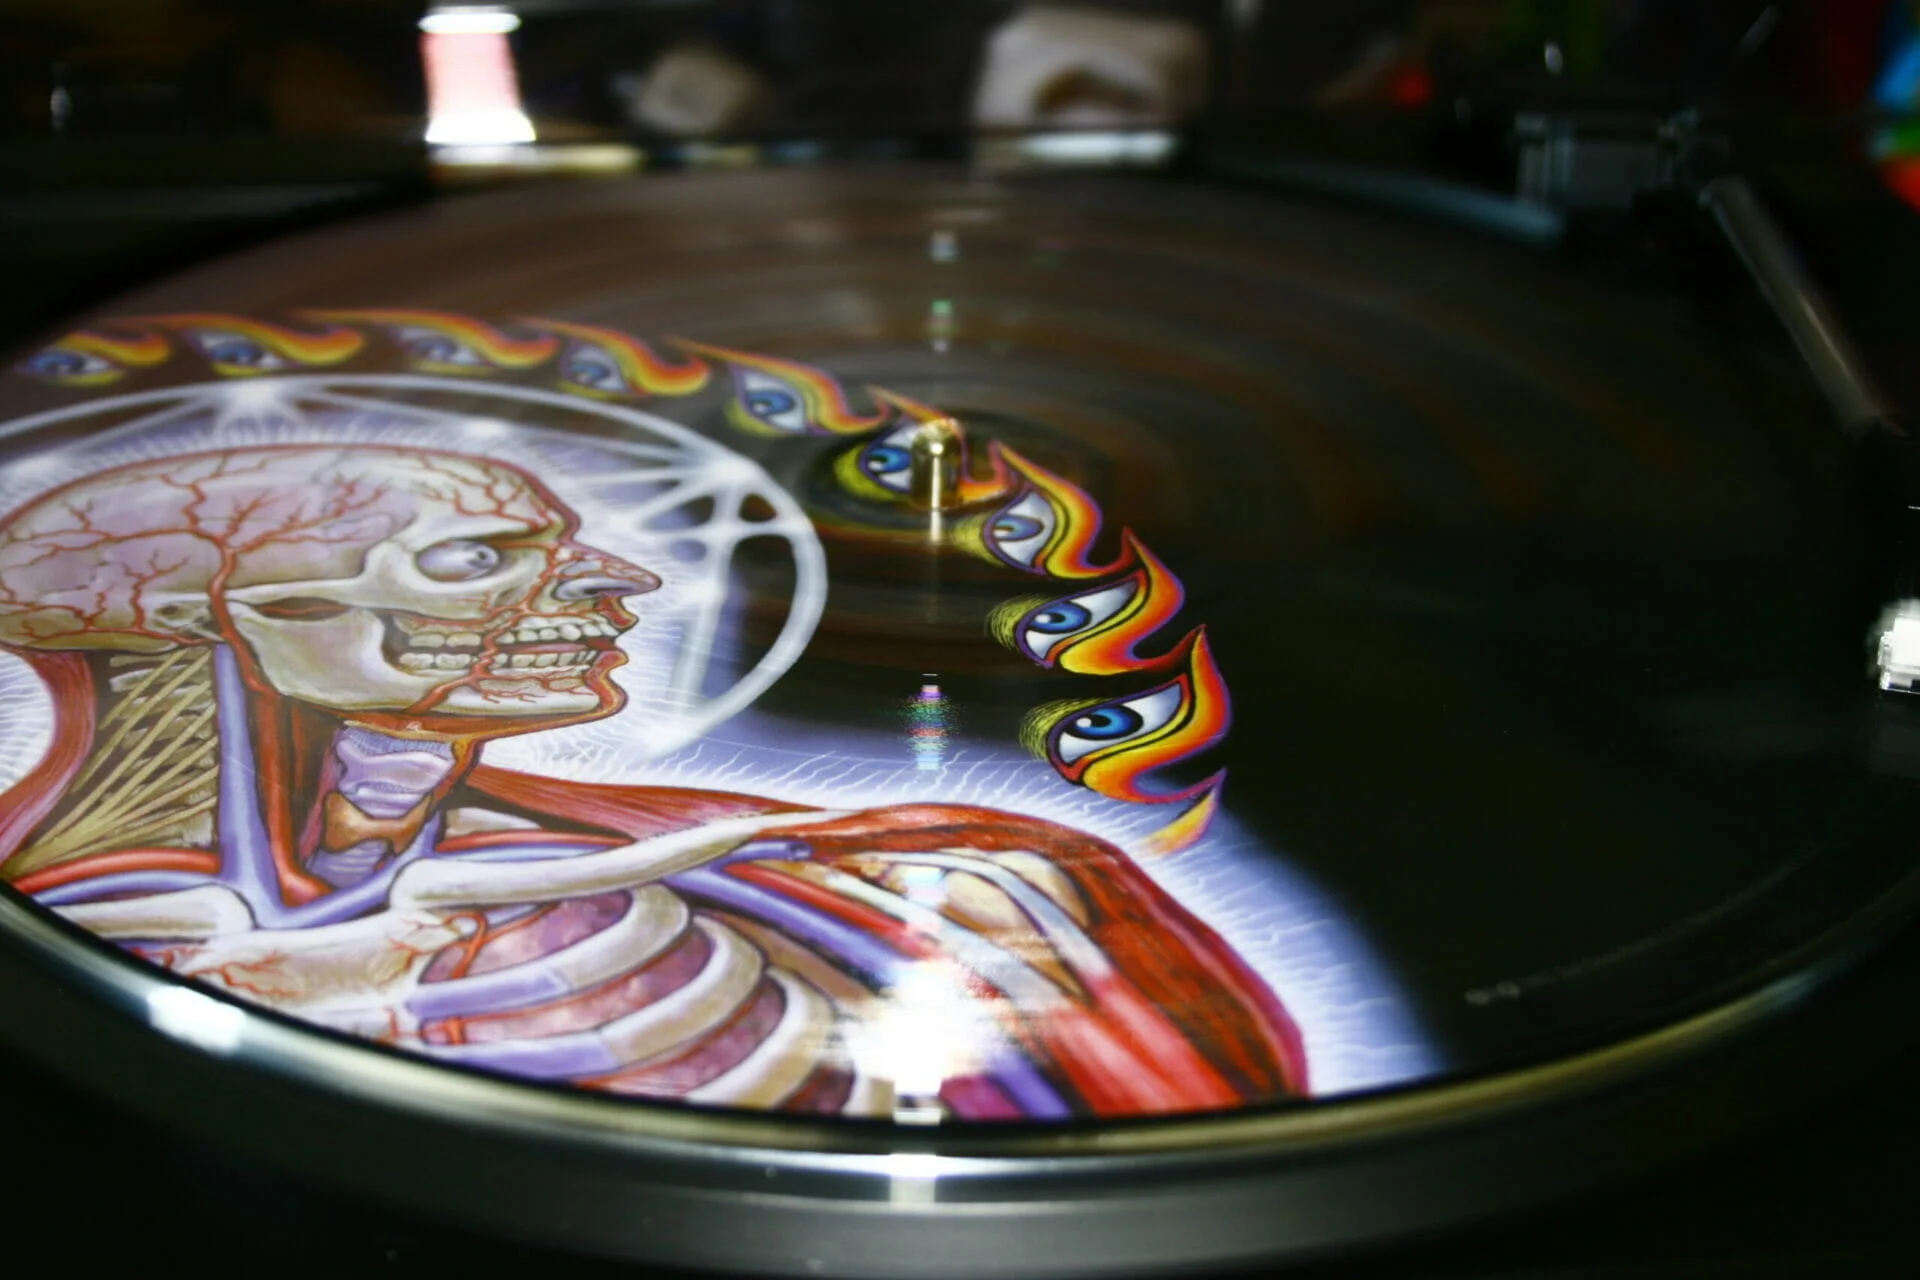 Lateralus | Music aimed at ascension